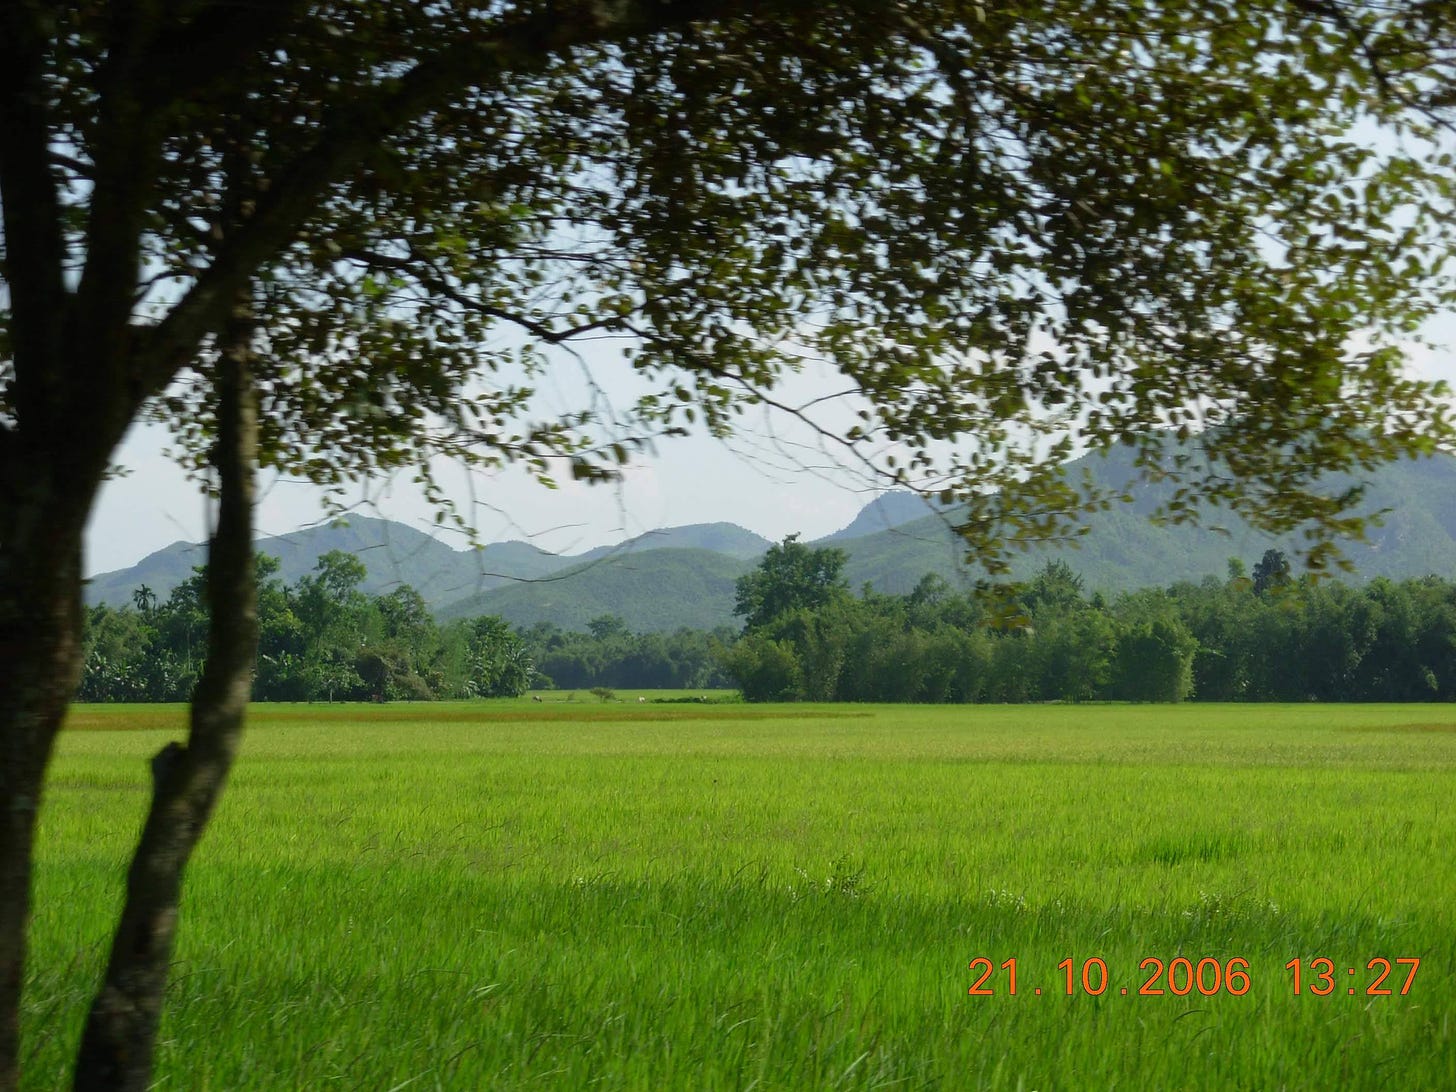 a green rice field in front of a grove of trees and blue-green hills. A tree in the foreground. The time stamps says 21.10.2006